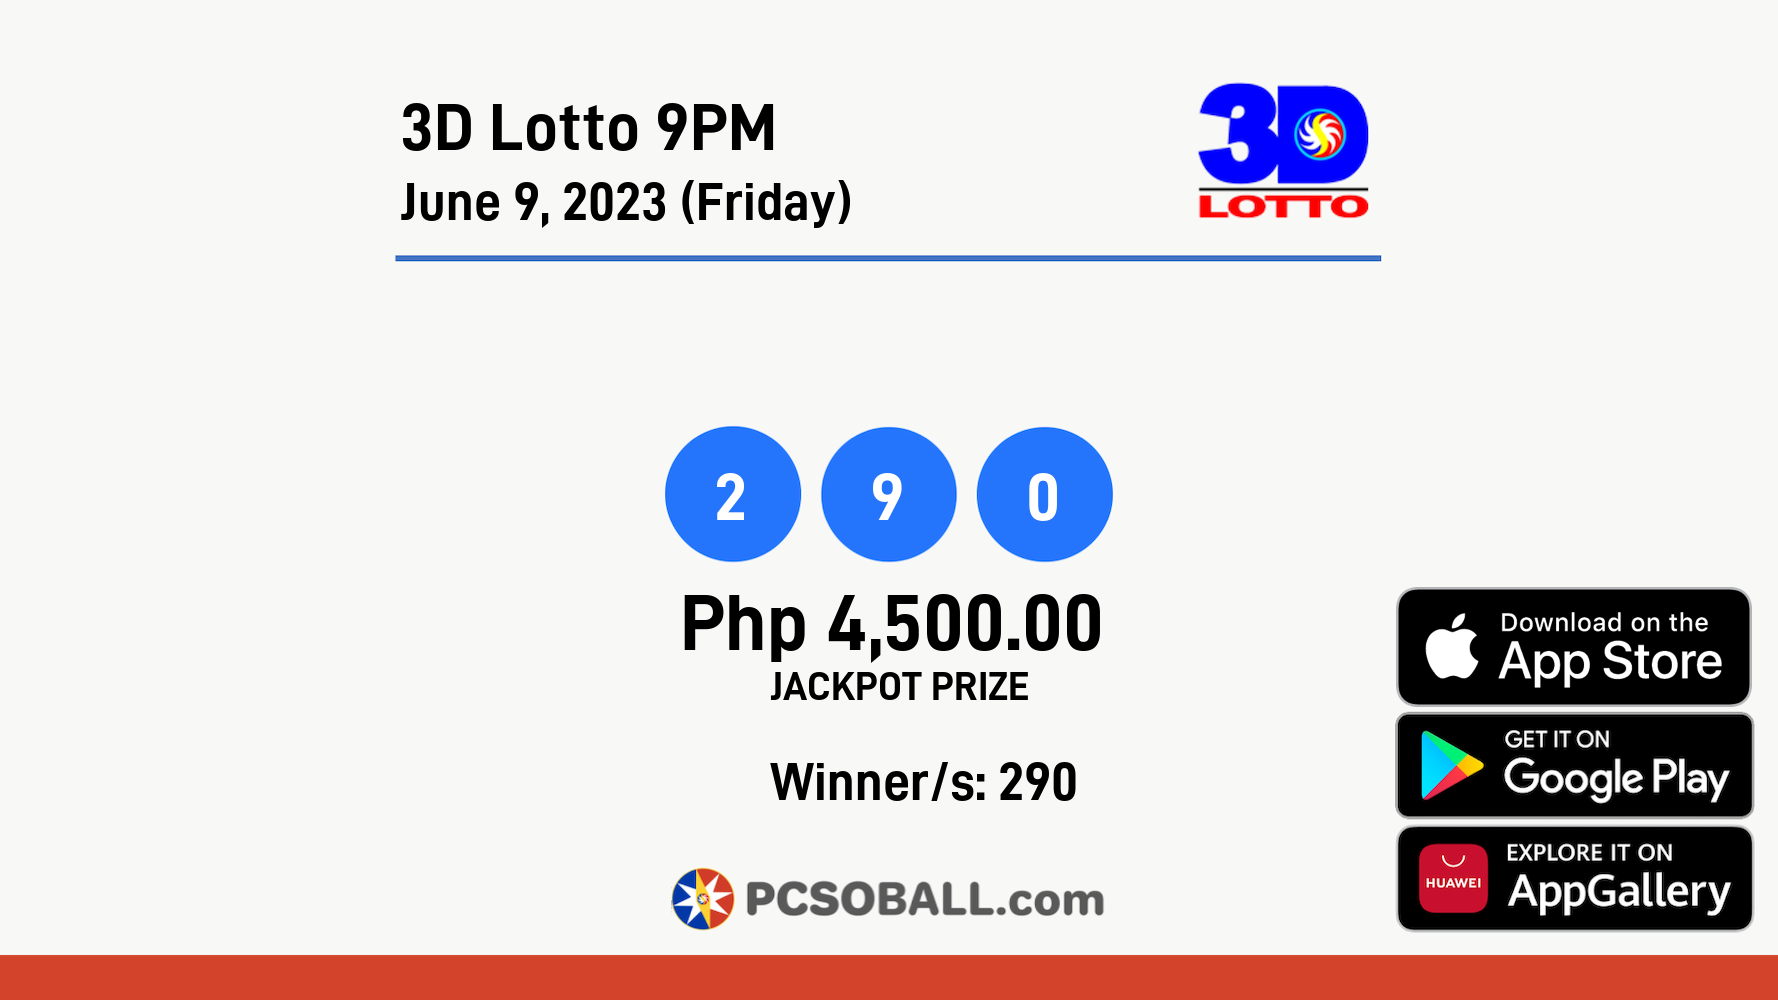 3D Lotto 9PM June 9, 2023 (Friday) Result